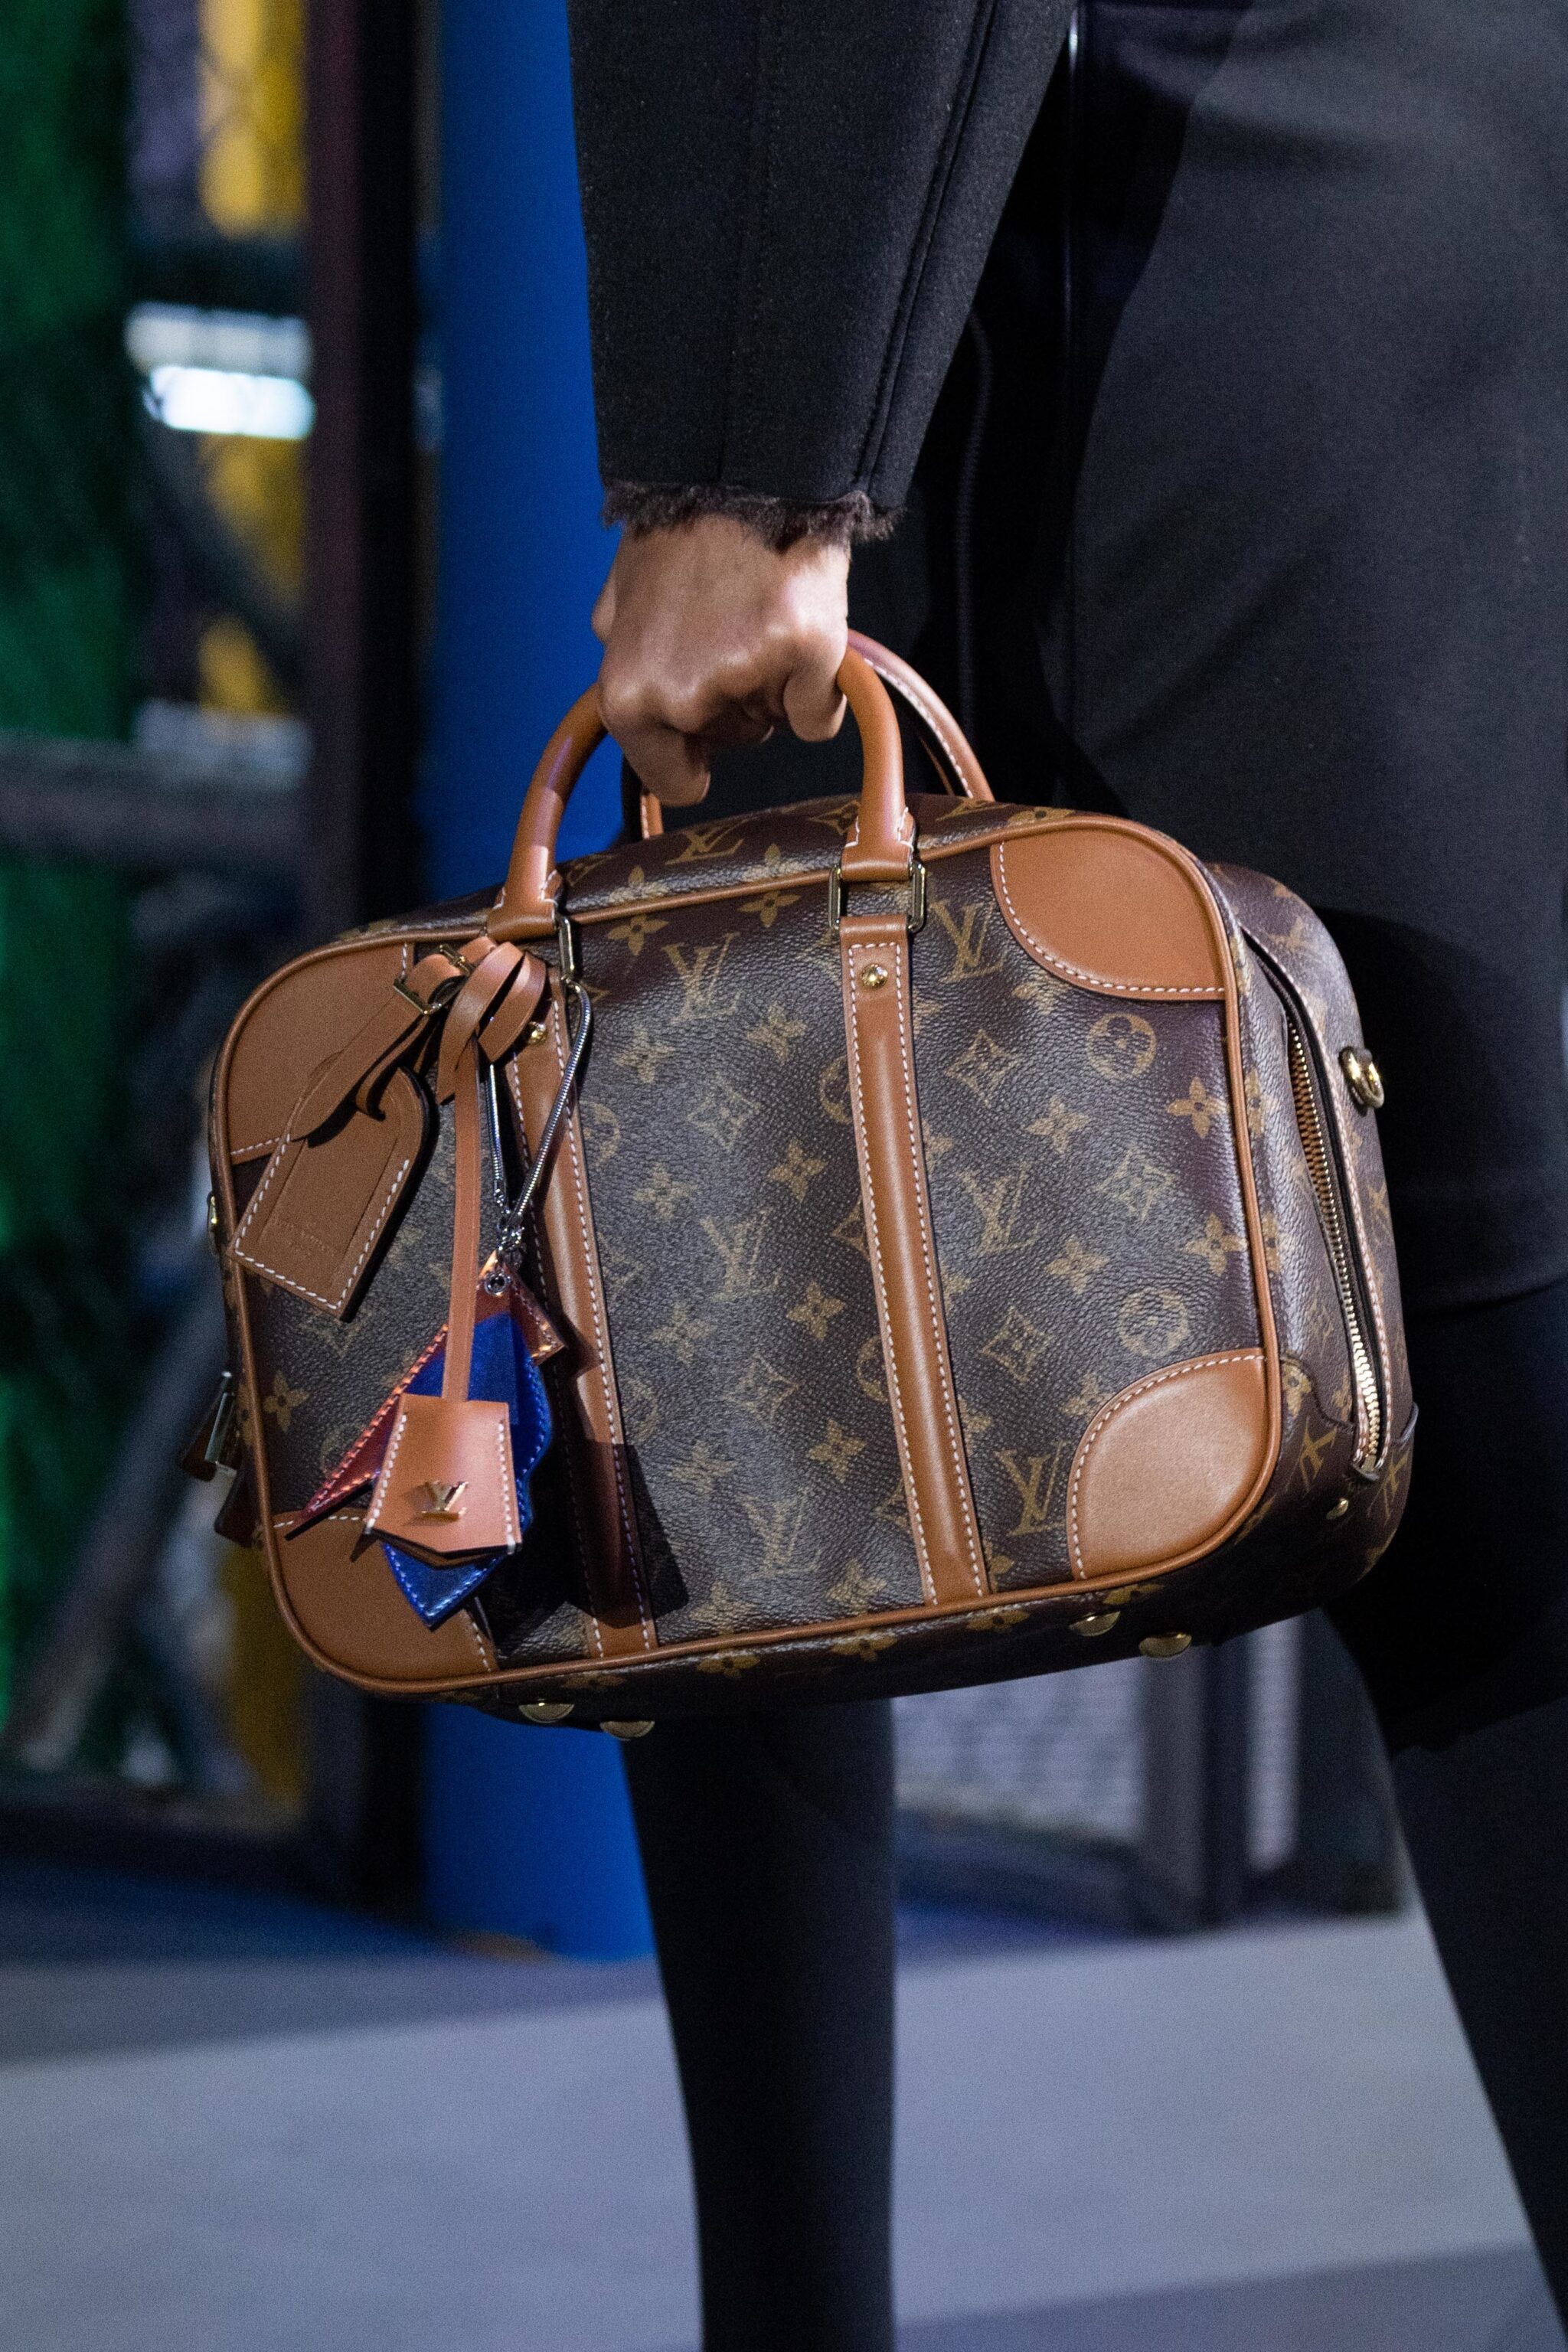 Louis Vuitton Men's Fall/Winter 2019 Runway Bag Collection - Spotted Fashion